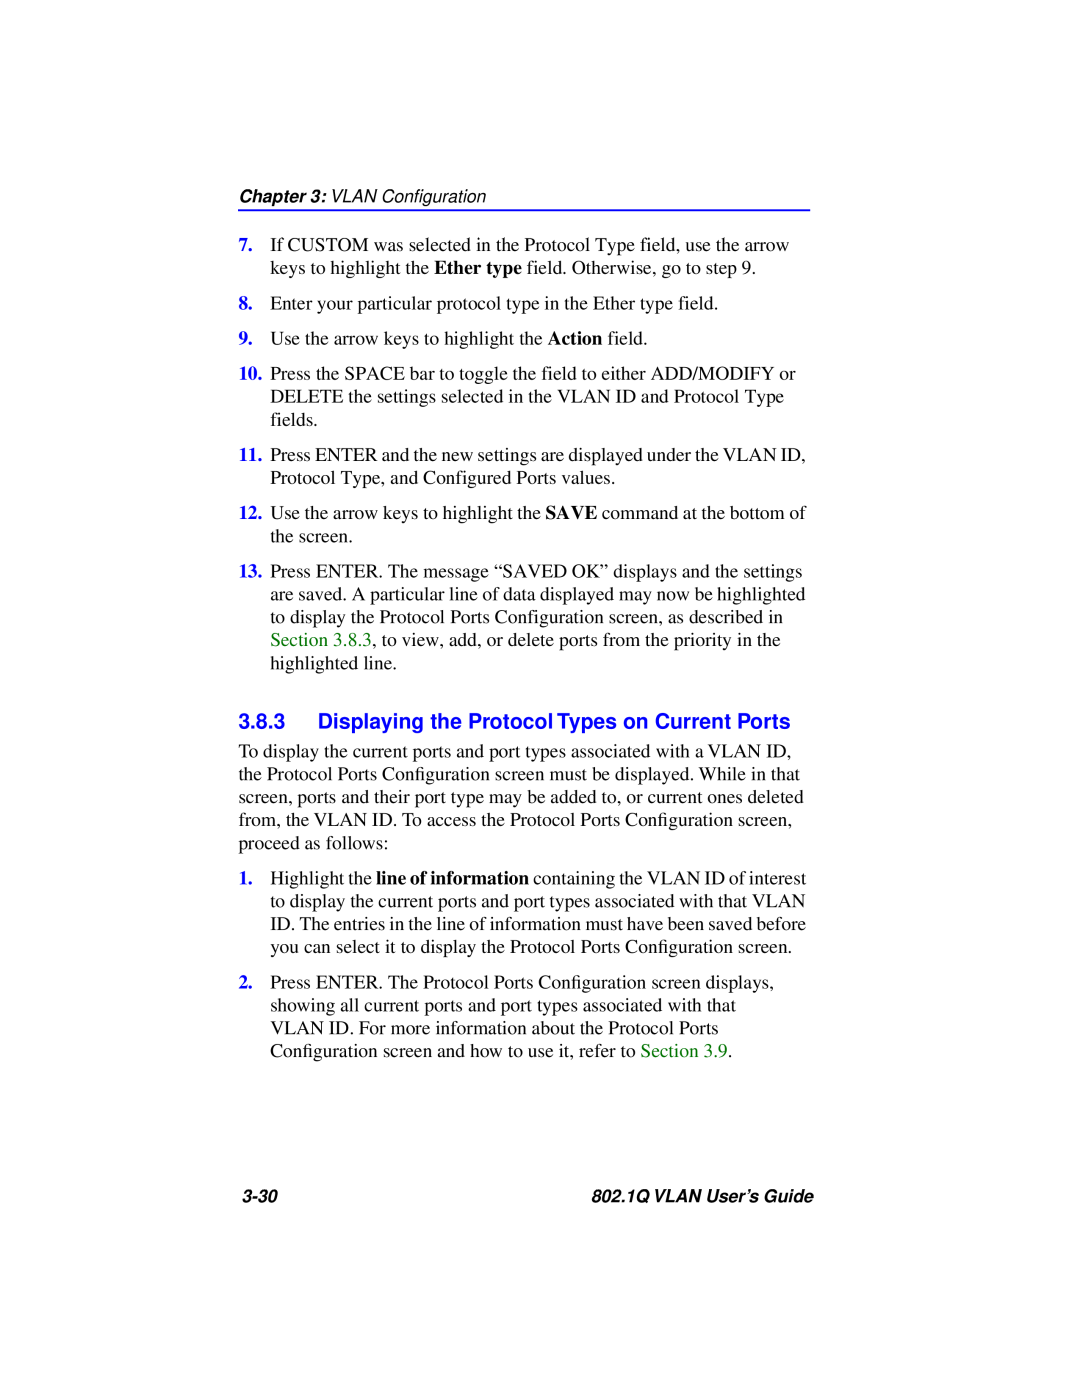 Cabletron Systems 802.1Q manual Displaying the Protocol Types on Current Ports 